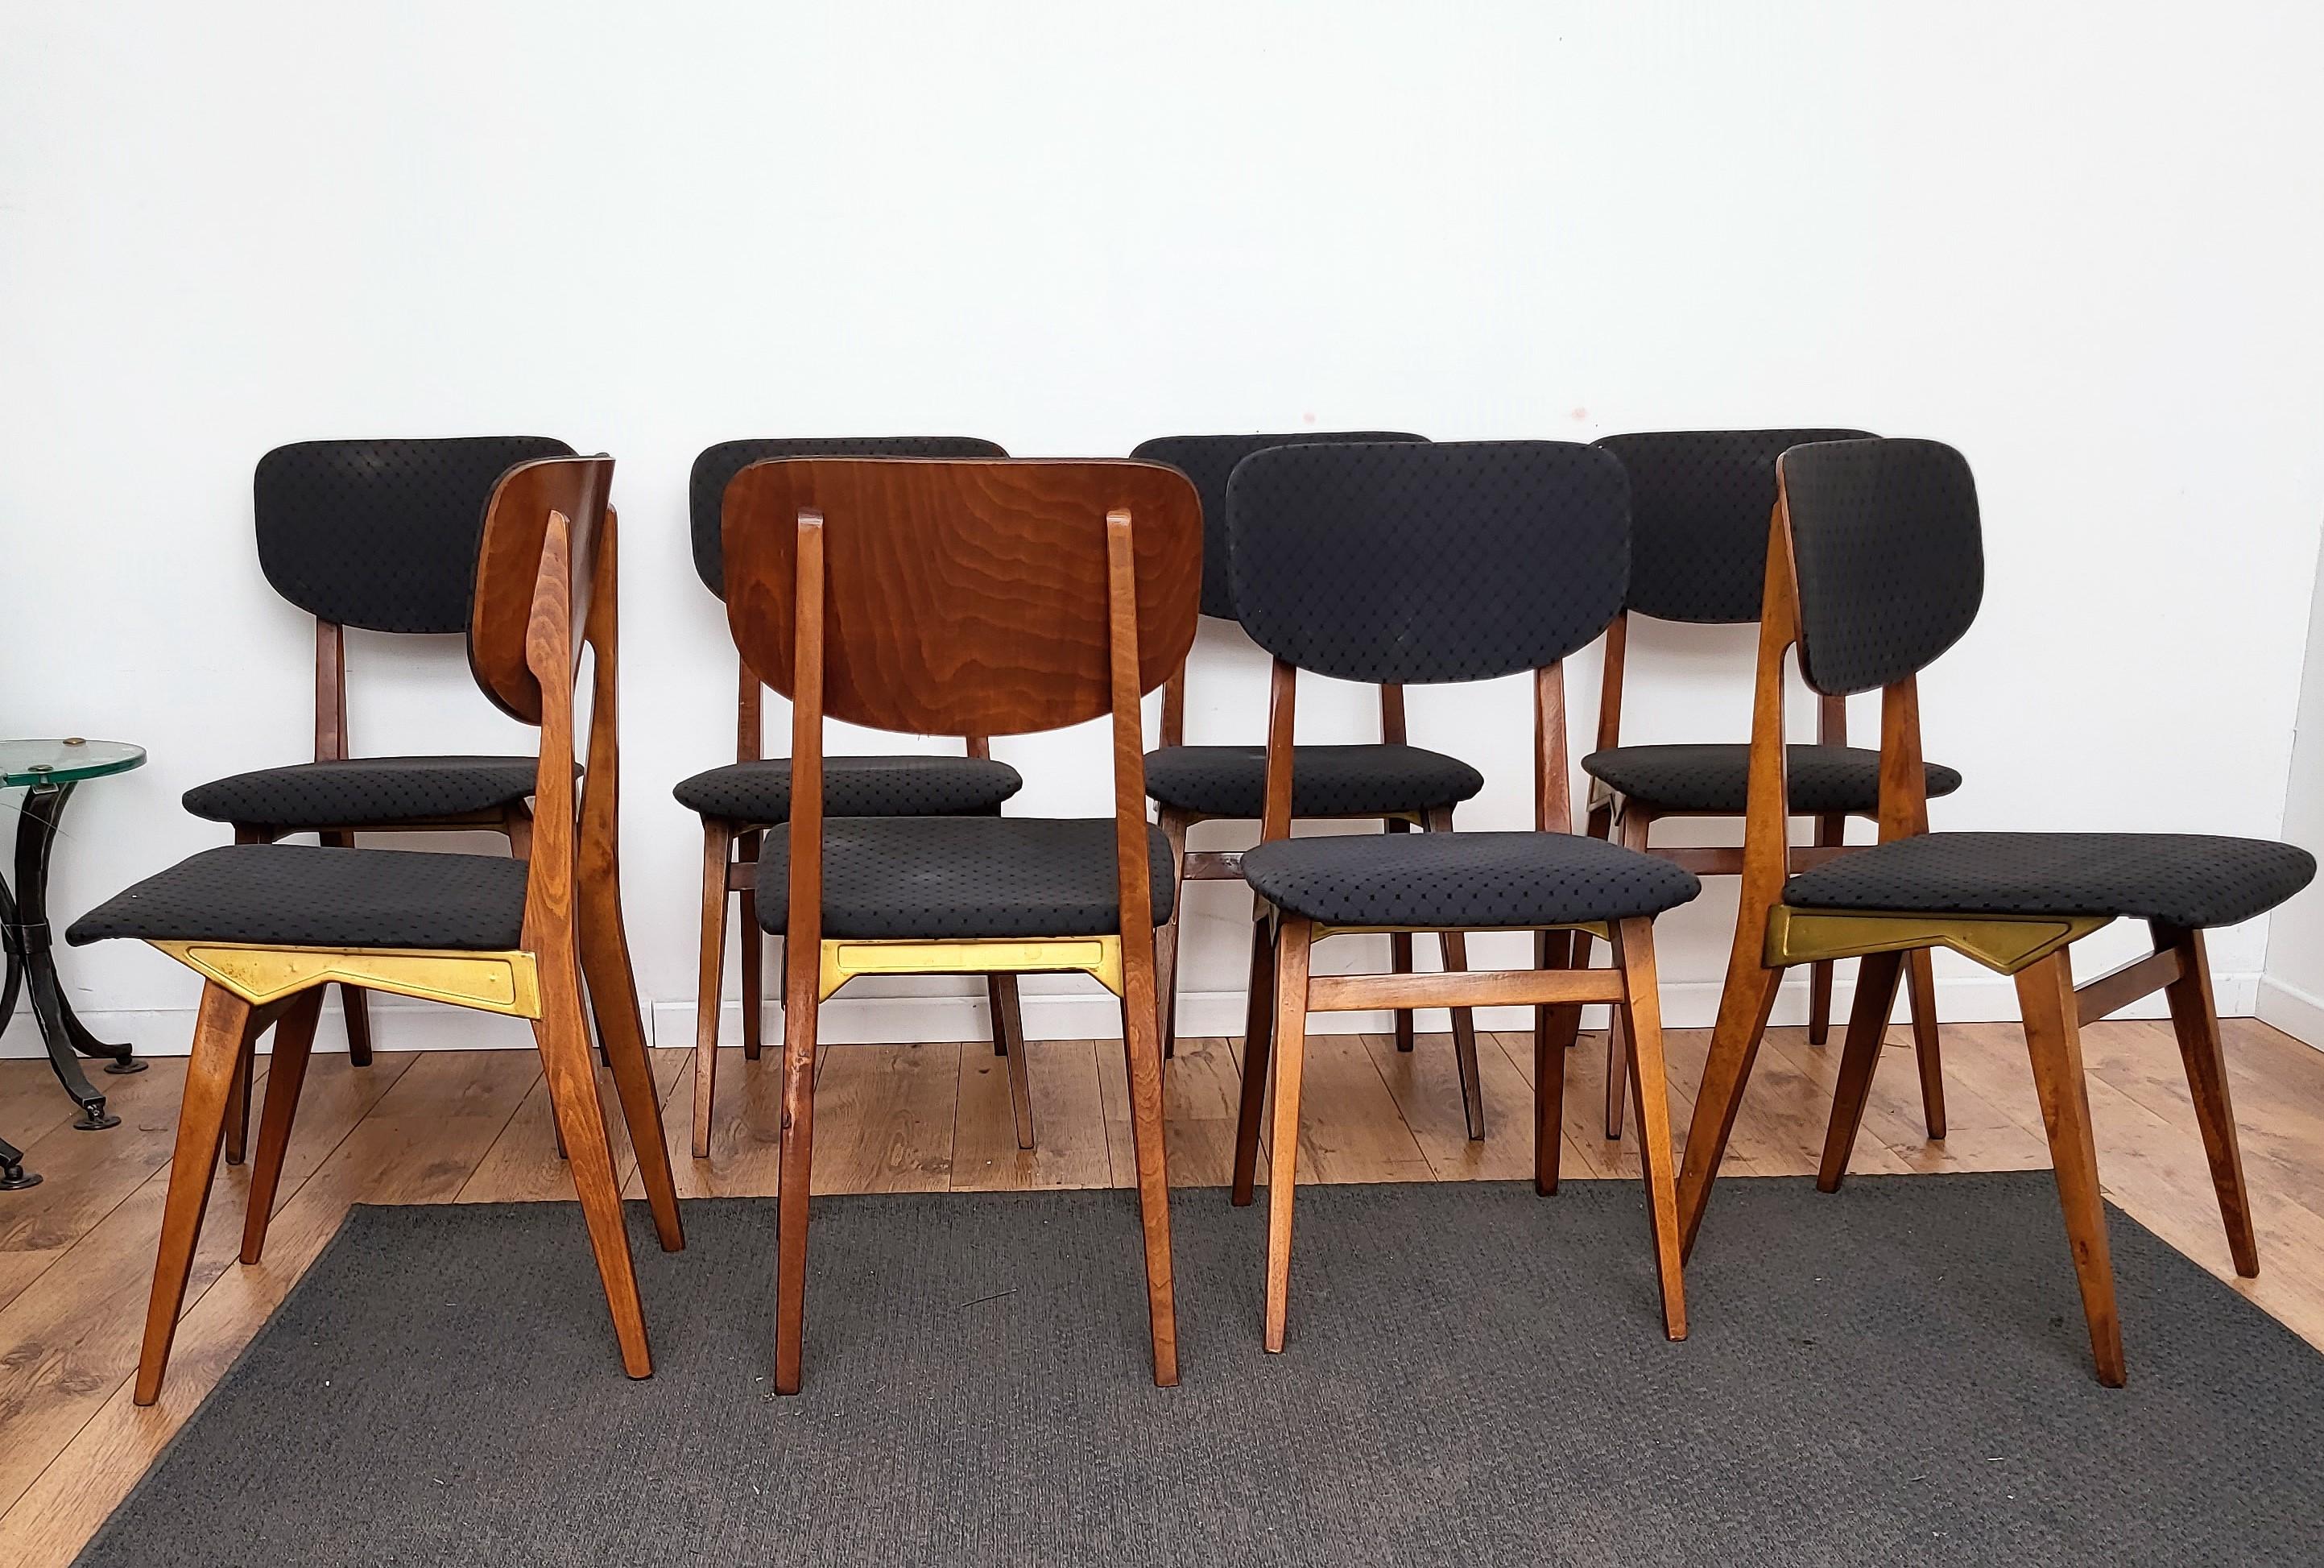 Very elegant Italian Mid-Century Modern set of 8 dining chairs, with greatly shaped wooden structure, upholstered seat and back and beautiful gilt metal detail. , where we find the maker's details, Francor Ospitaletto, a village in the surroundings